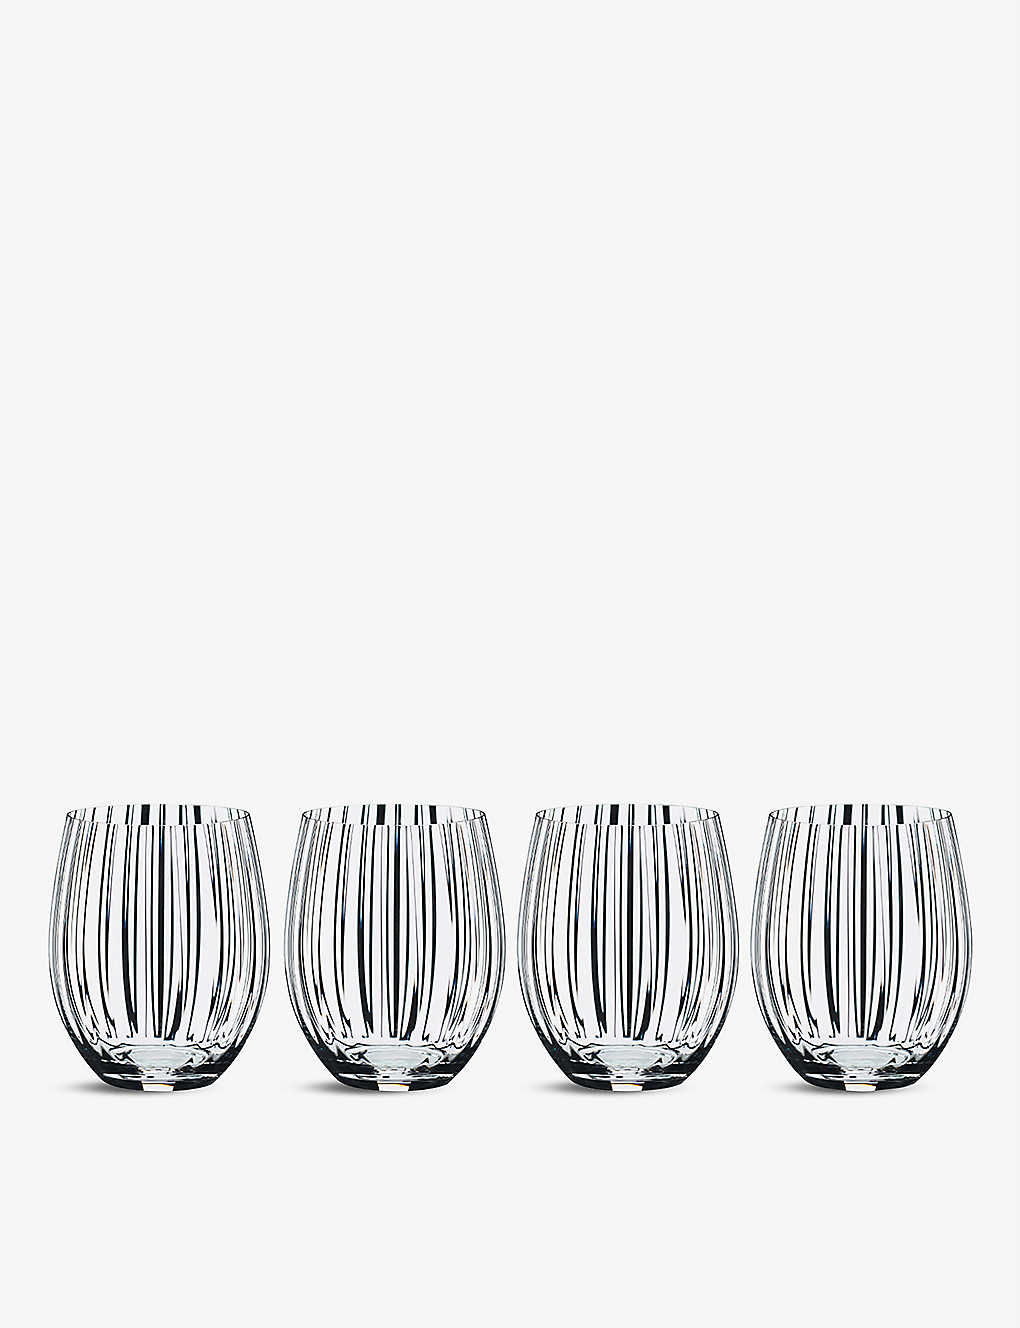 Riedel Mixing Tonic Crystal Glasses Set Of Four